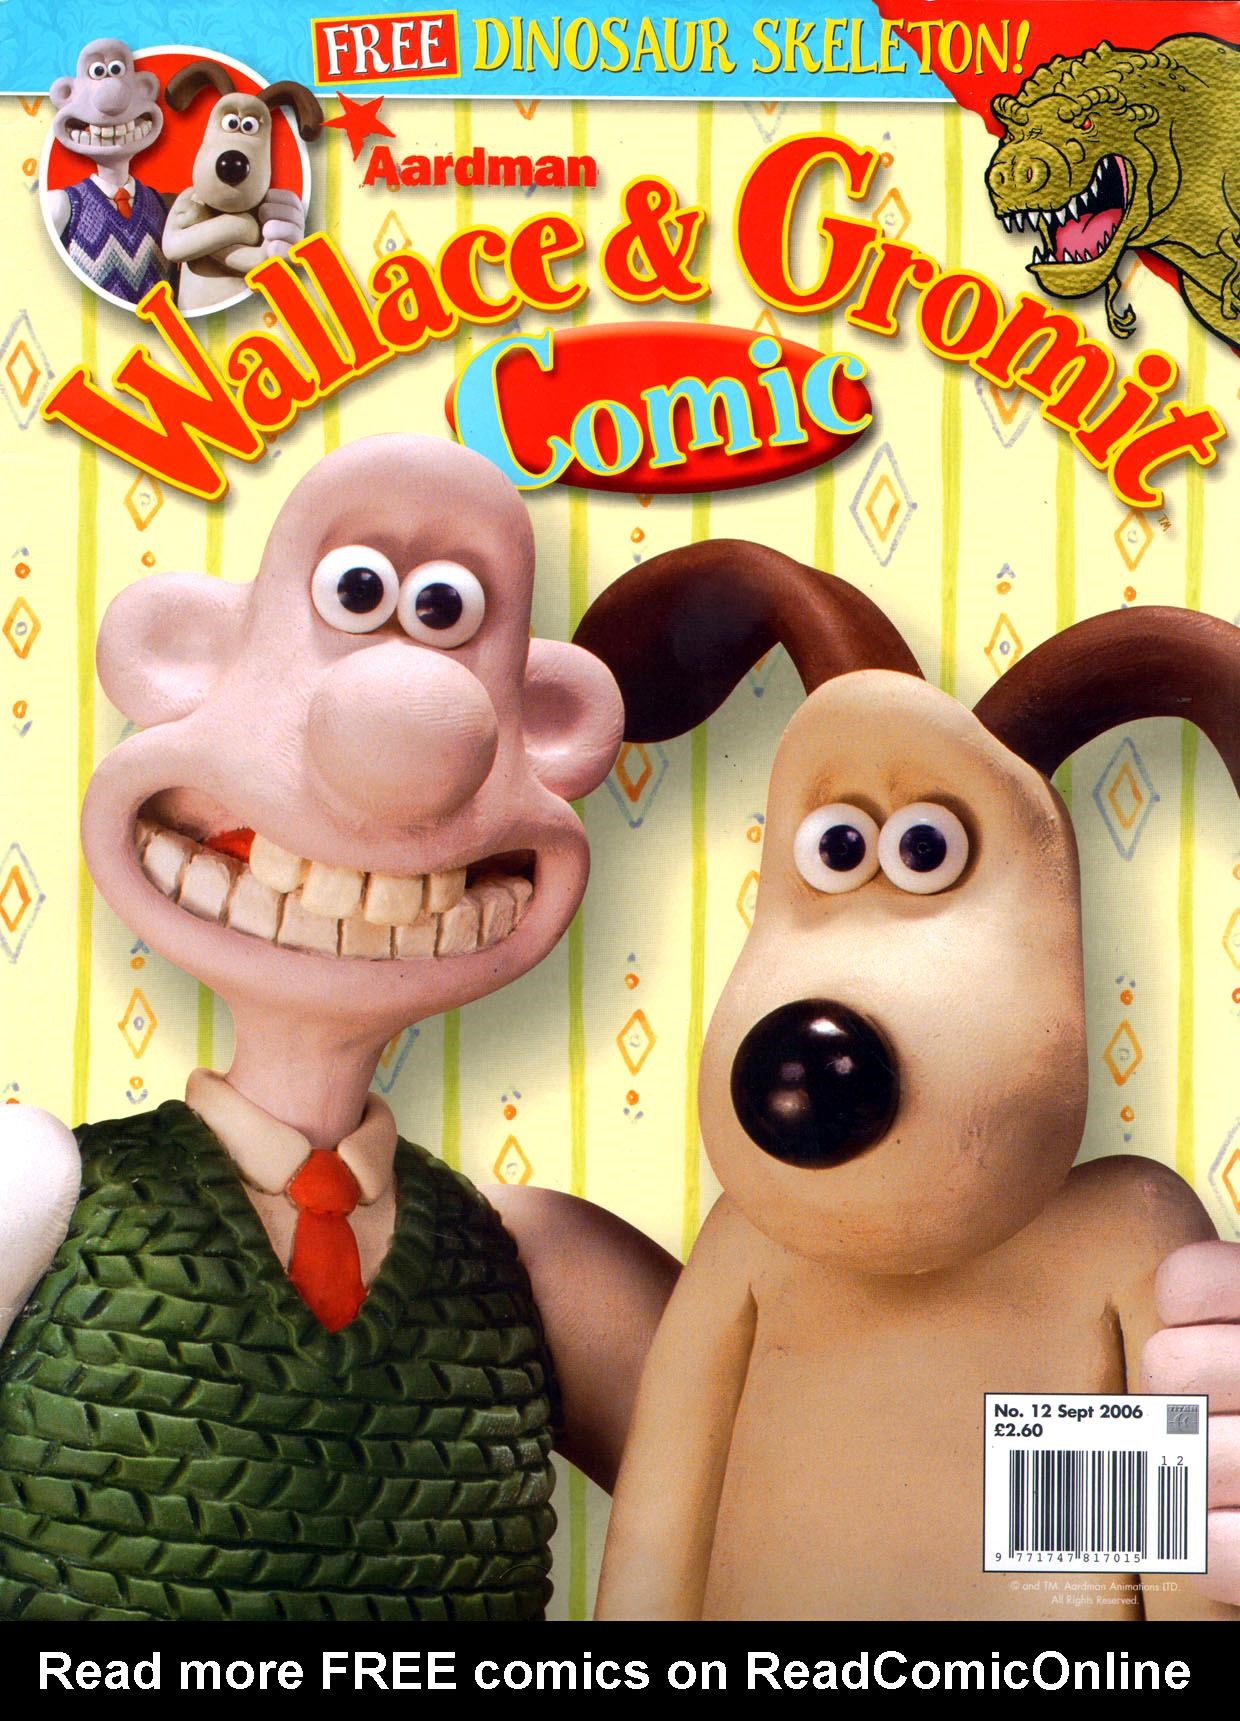 Read online Wallace & Gromit Comic comic -  Issue #12 - 1